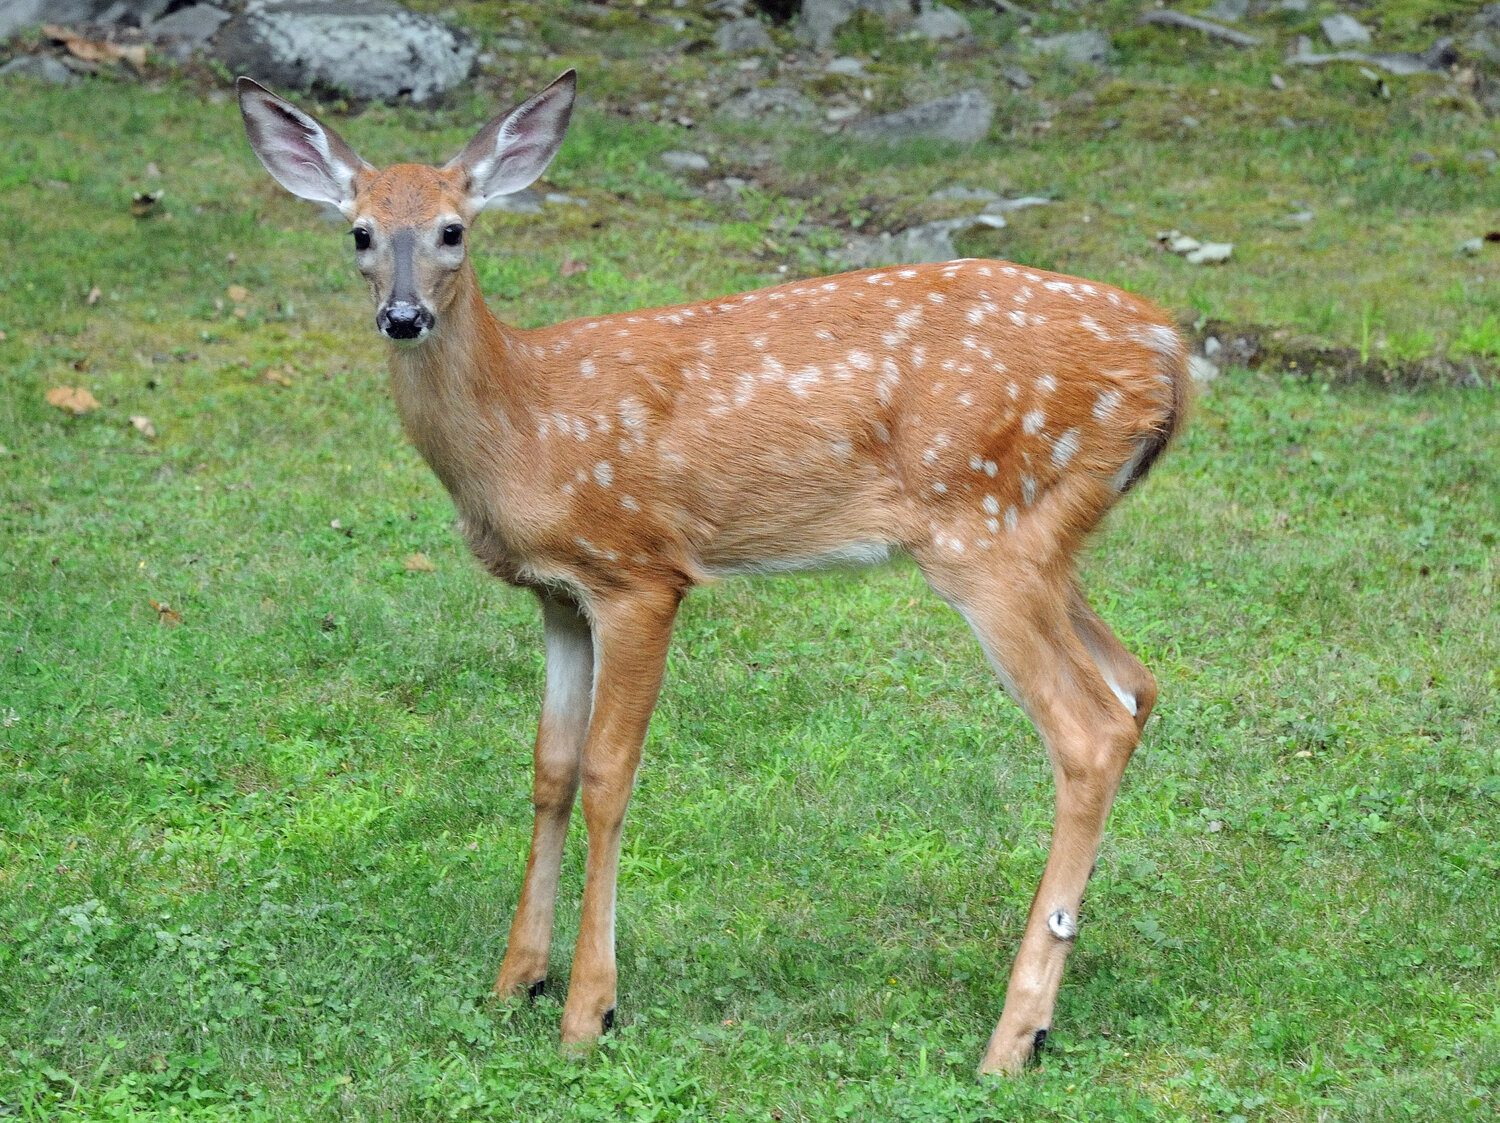 This is a fawn, seen during August, so it is a little over two months old. During spring and summer, both fawns and adult deer have a lighter summer coat, appearing almost burnt orange in the right light. Fawns are weaned from two to three months old and will weigh around 70 pounds by their first winter. Young does leave the mother after two years; young bucks leave after the first year.